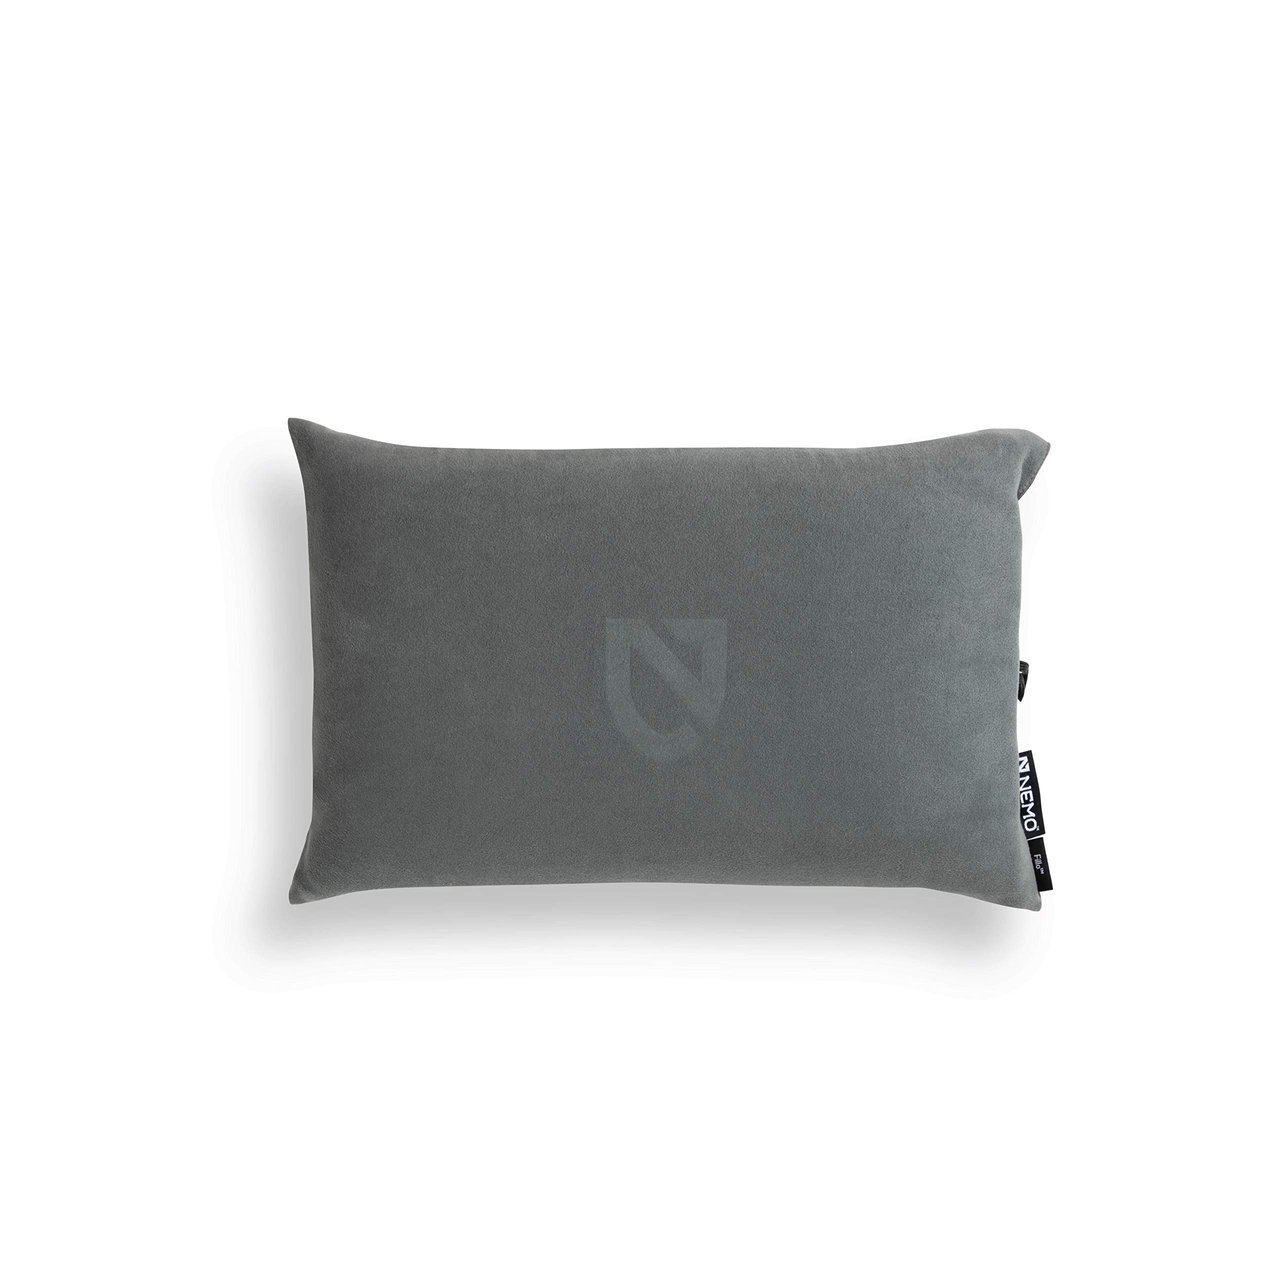 1 Nemo AirRest - Lightweight Rechargeable Pillow for Outdoor Adventures or On-the-Go